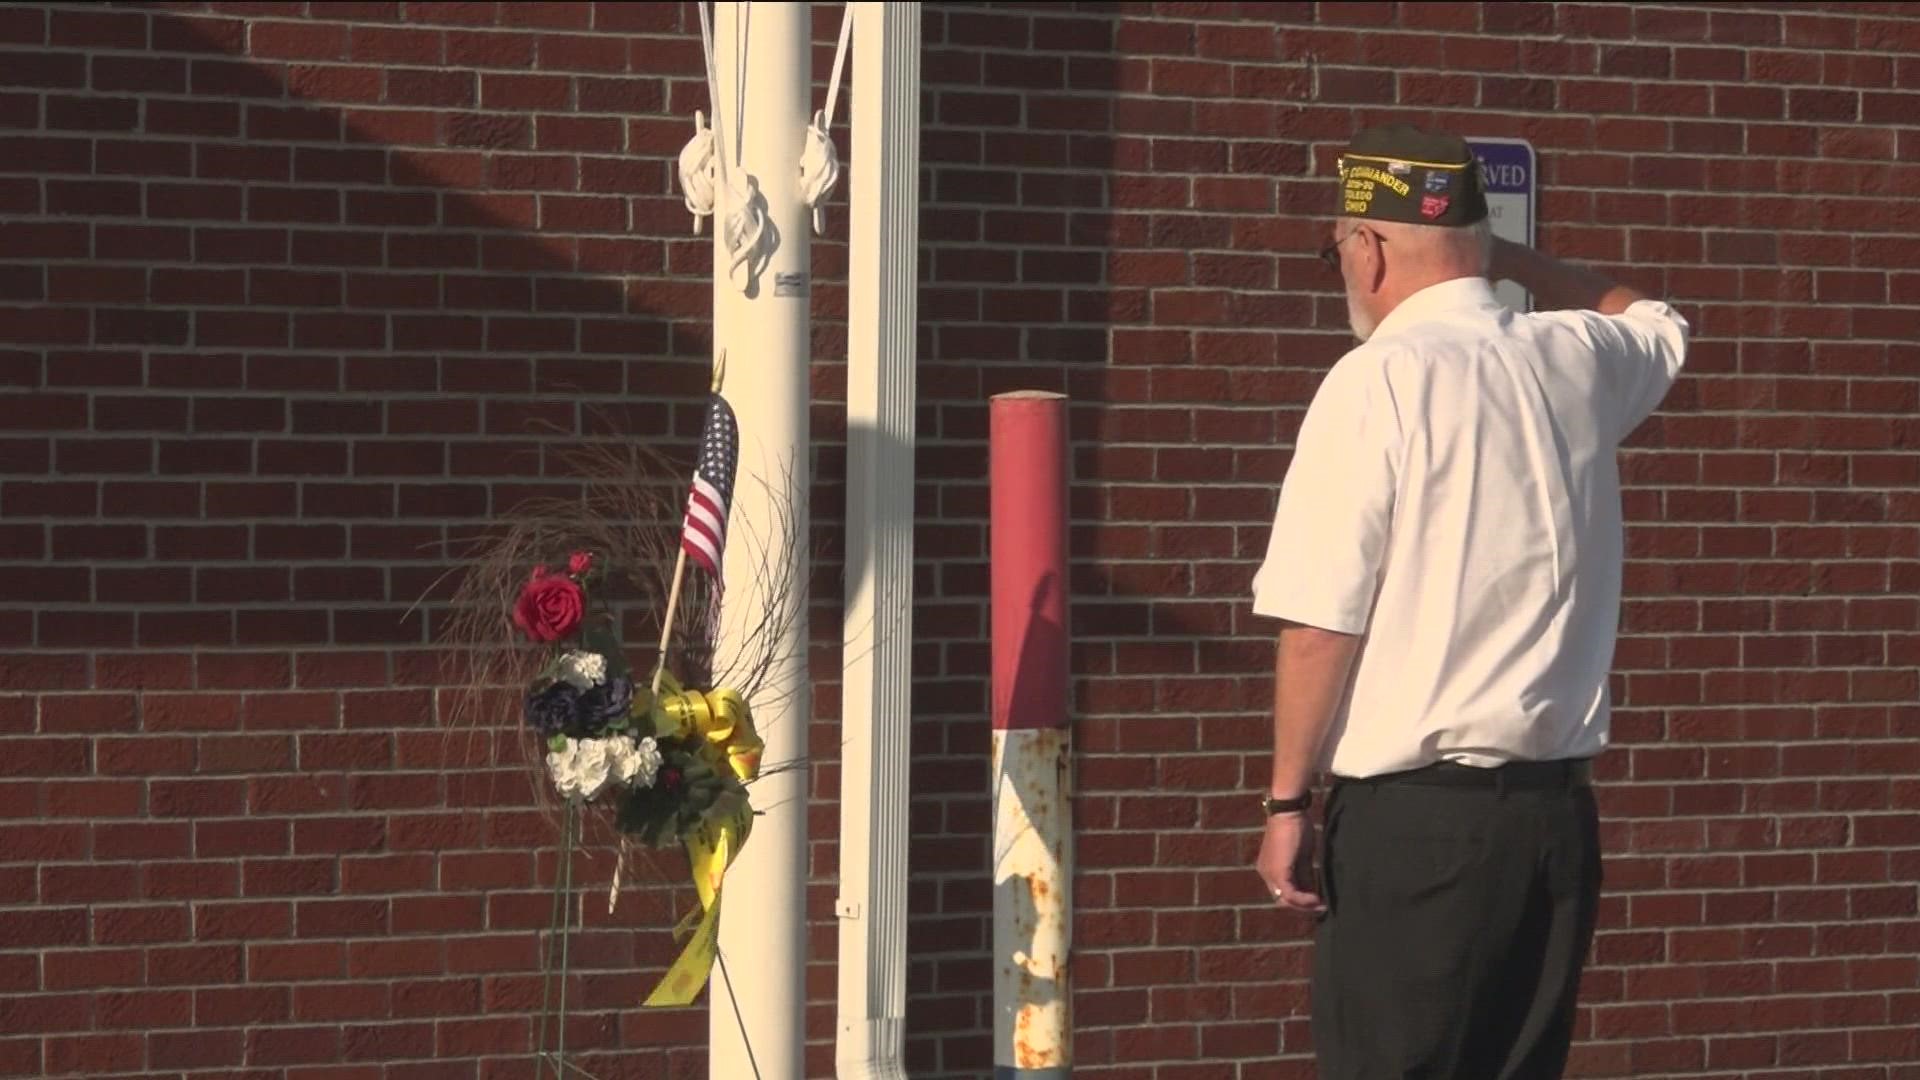 WTOL 11 spent part of the day with some local veterans to see how they honor the fallen.